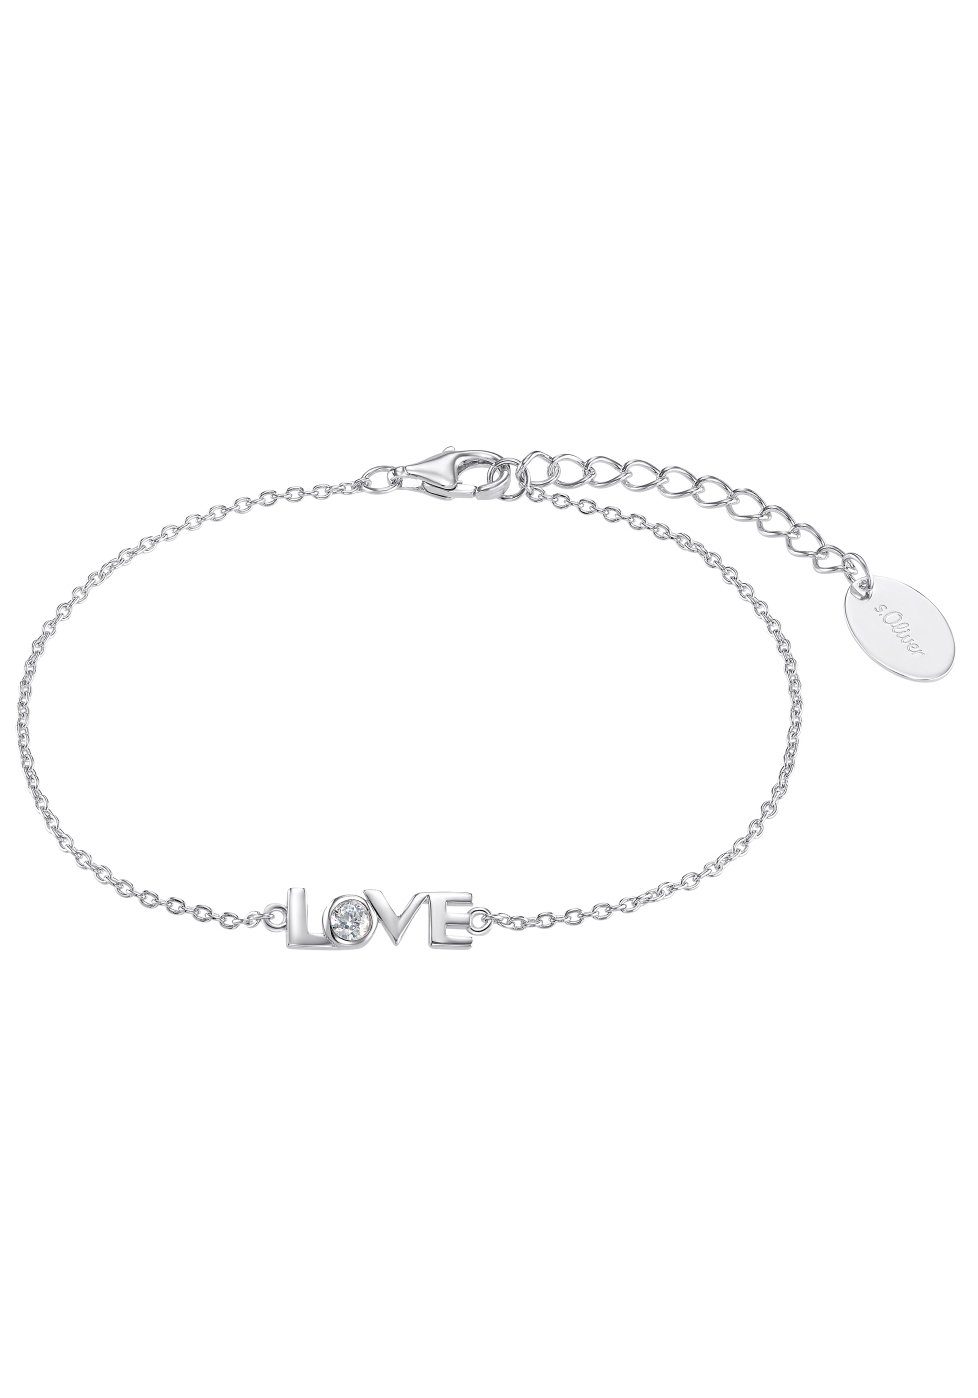 2034344, (synth) Armband s.Oliver Zirkonia mit LOVE,